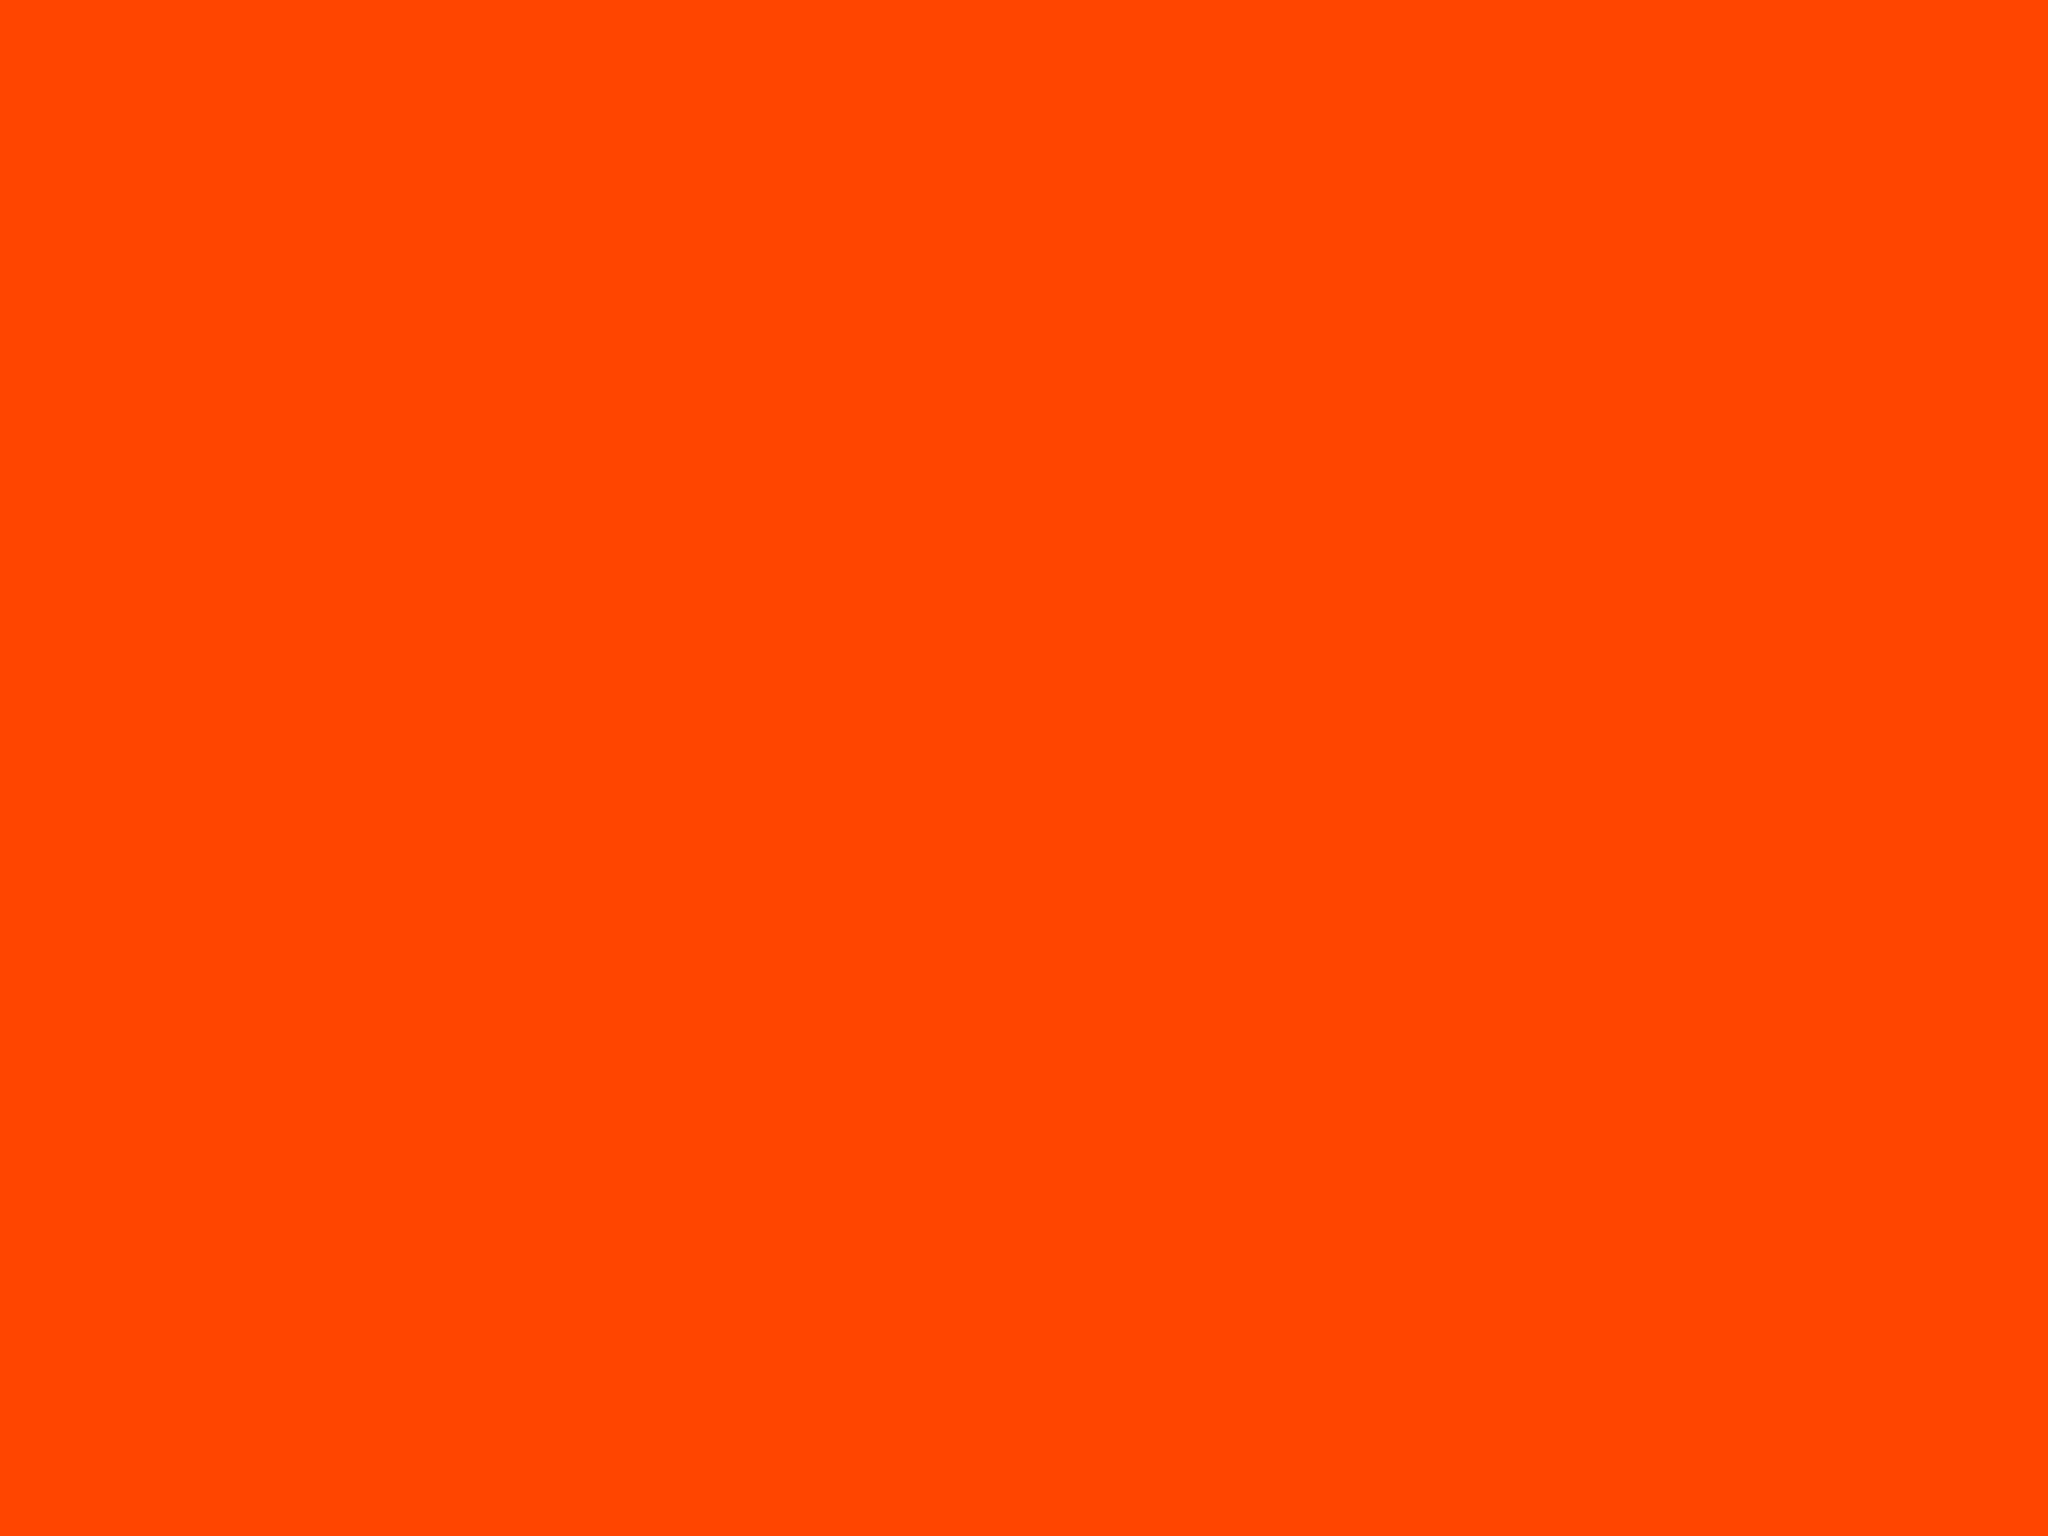 Free 2048x1536 resolution Orange red solid color background view and